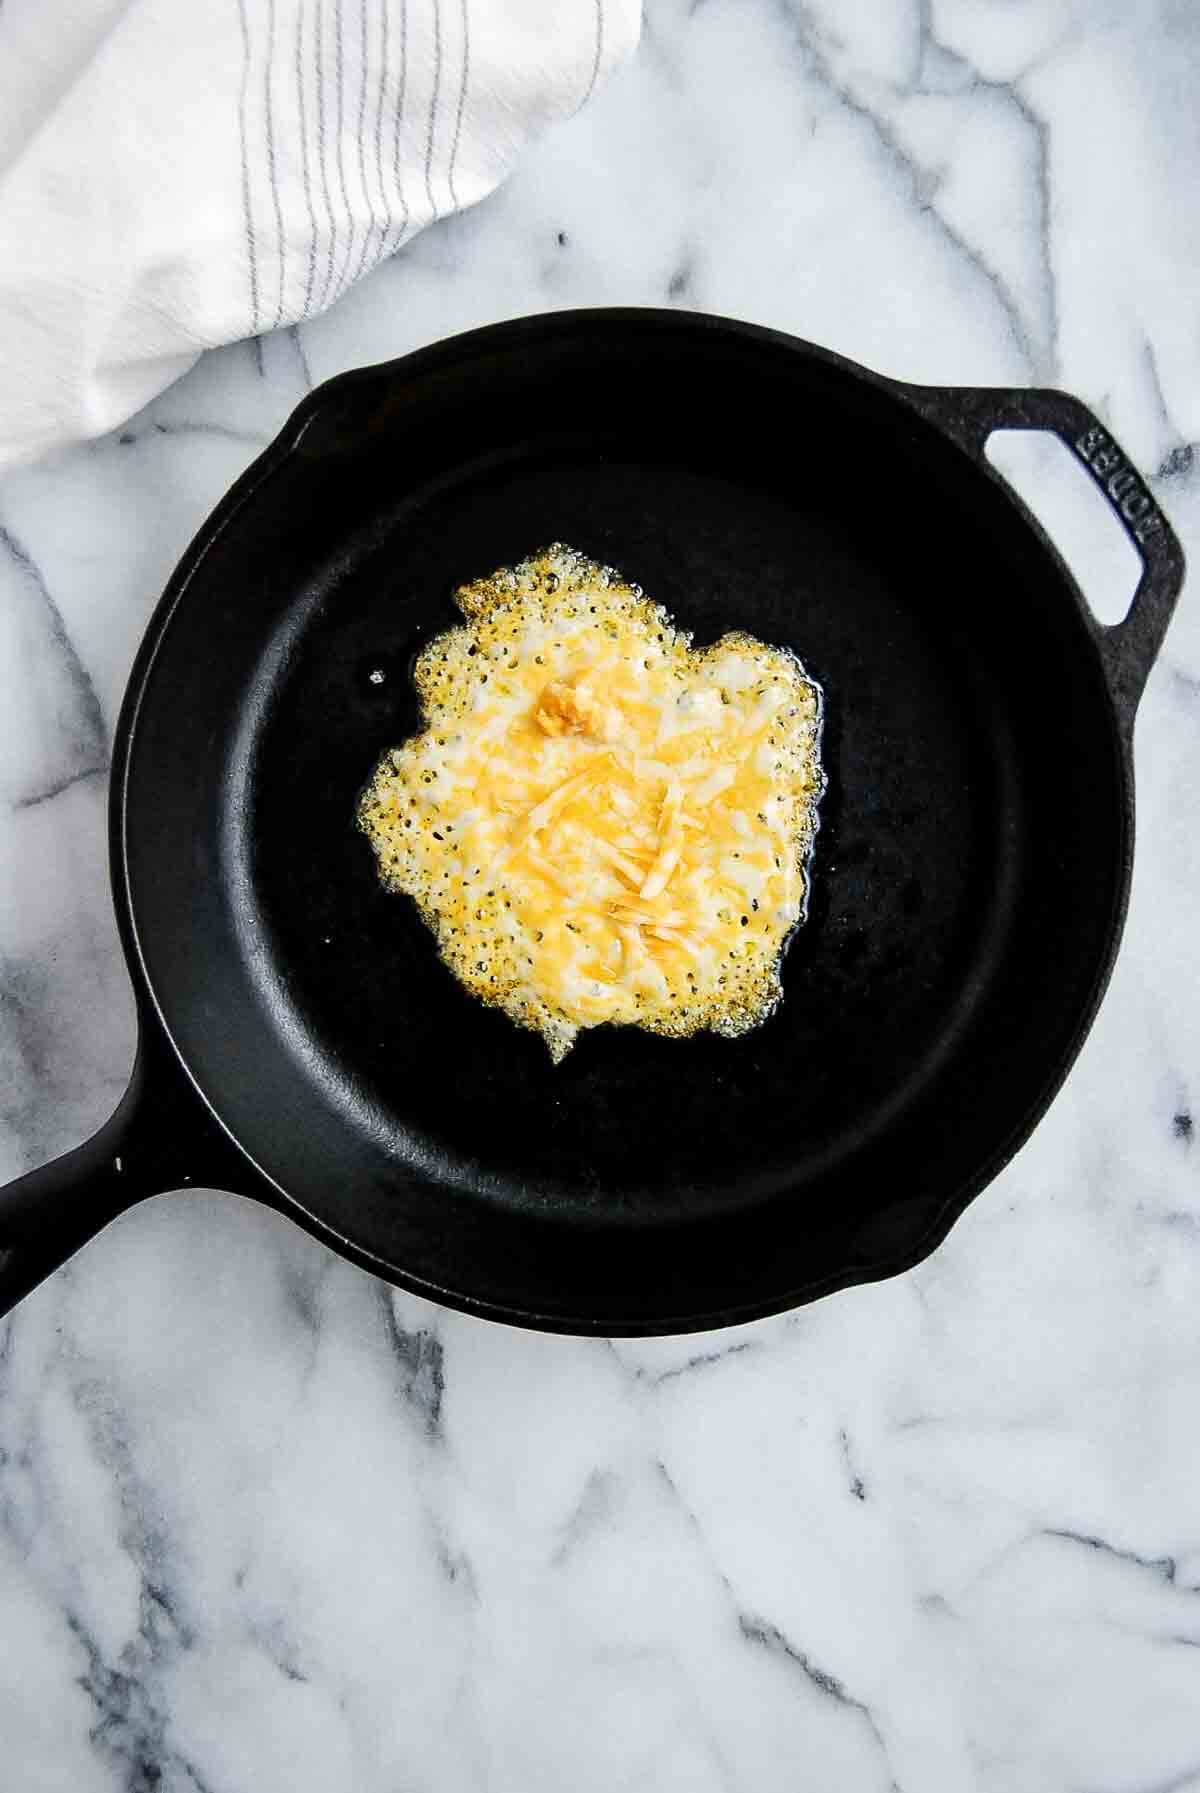 shredded colby jack cheese melting on cast iron skillet.